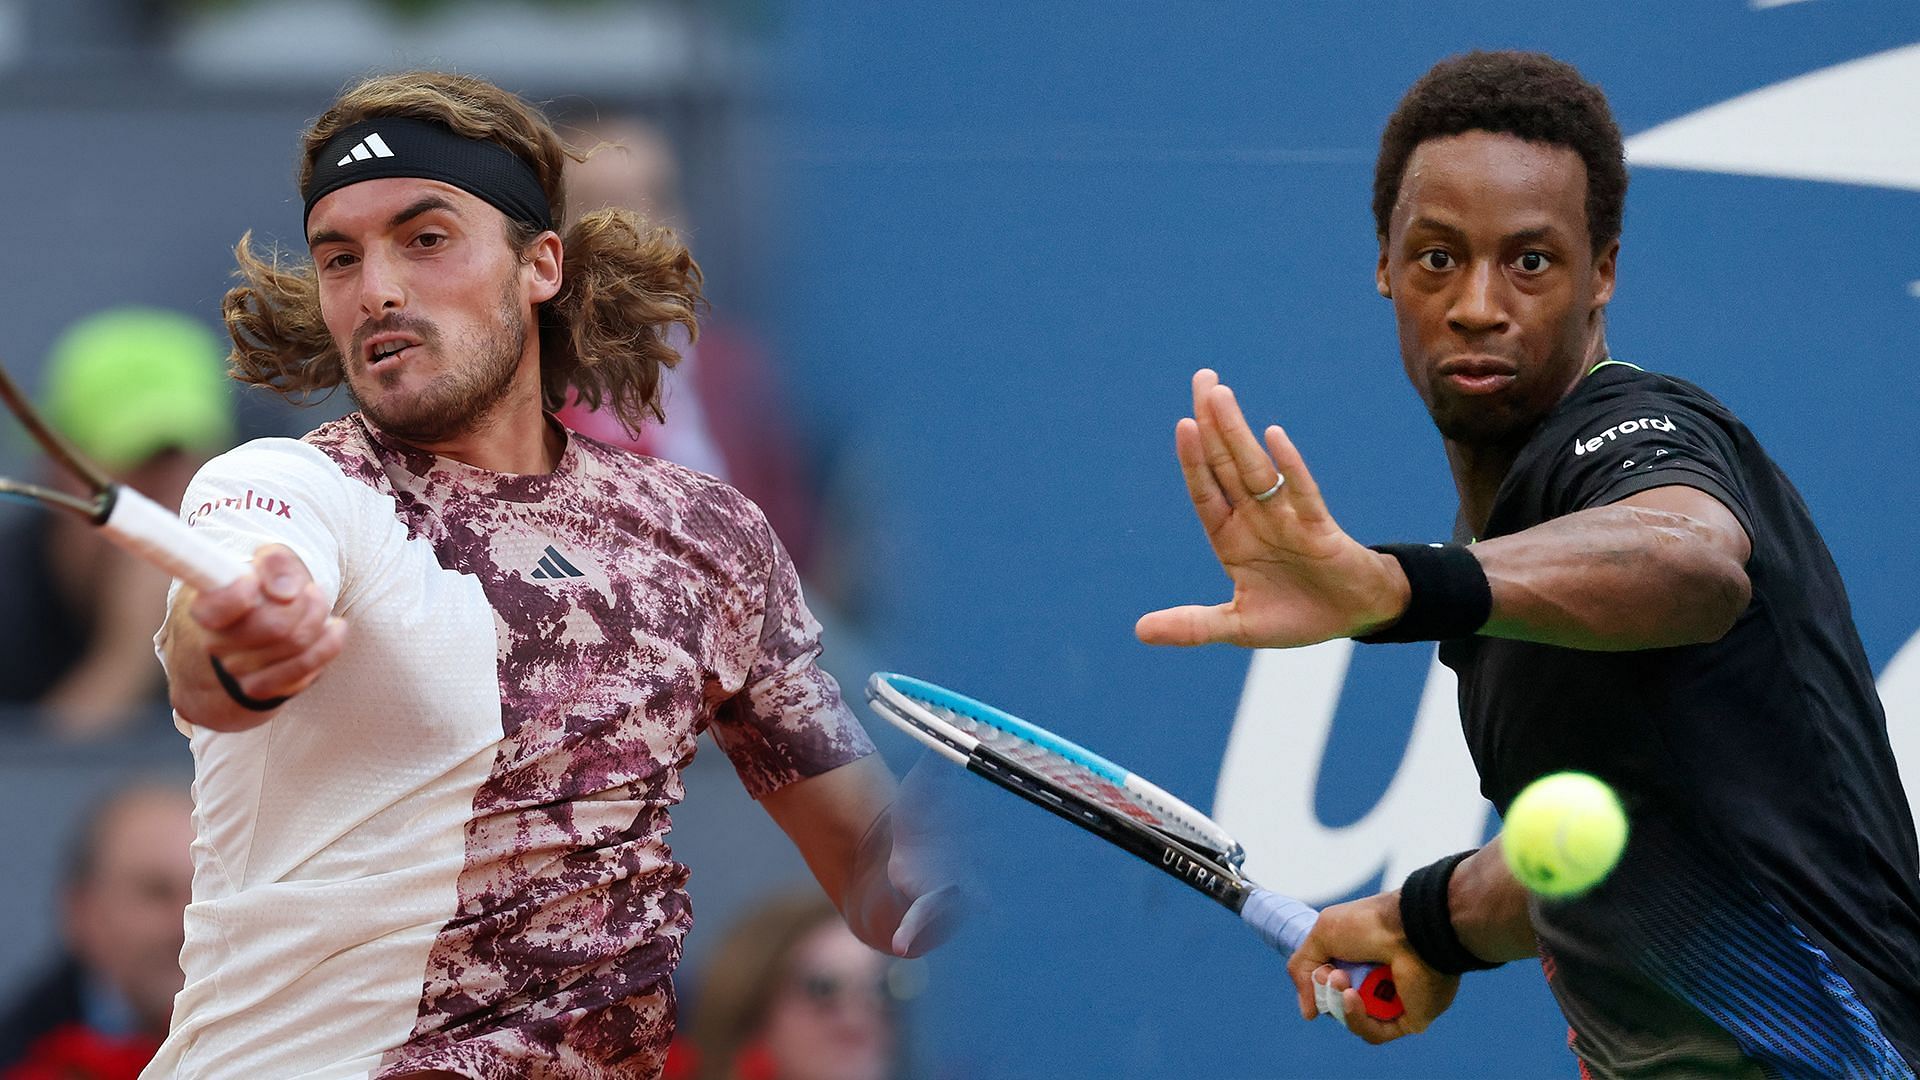 Stefanos Tsitsipas vs Gael Monfils is one of the second-round matches at the 2023 Canadian Open.